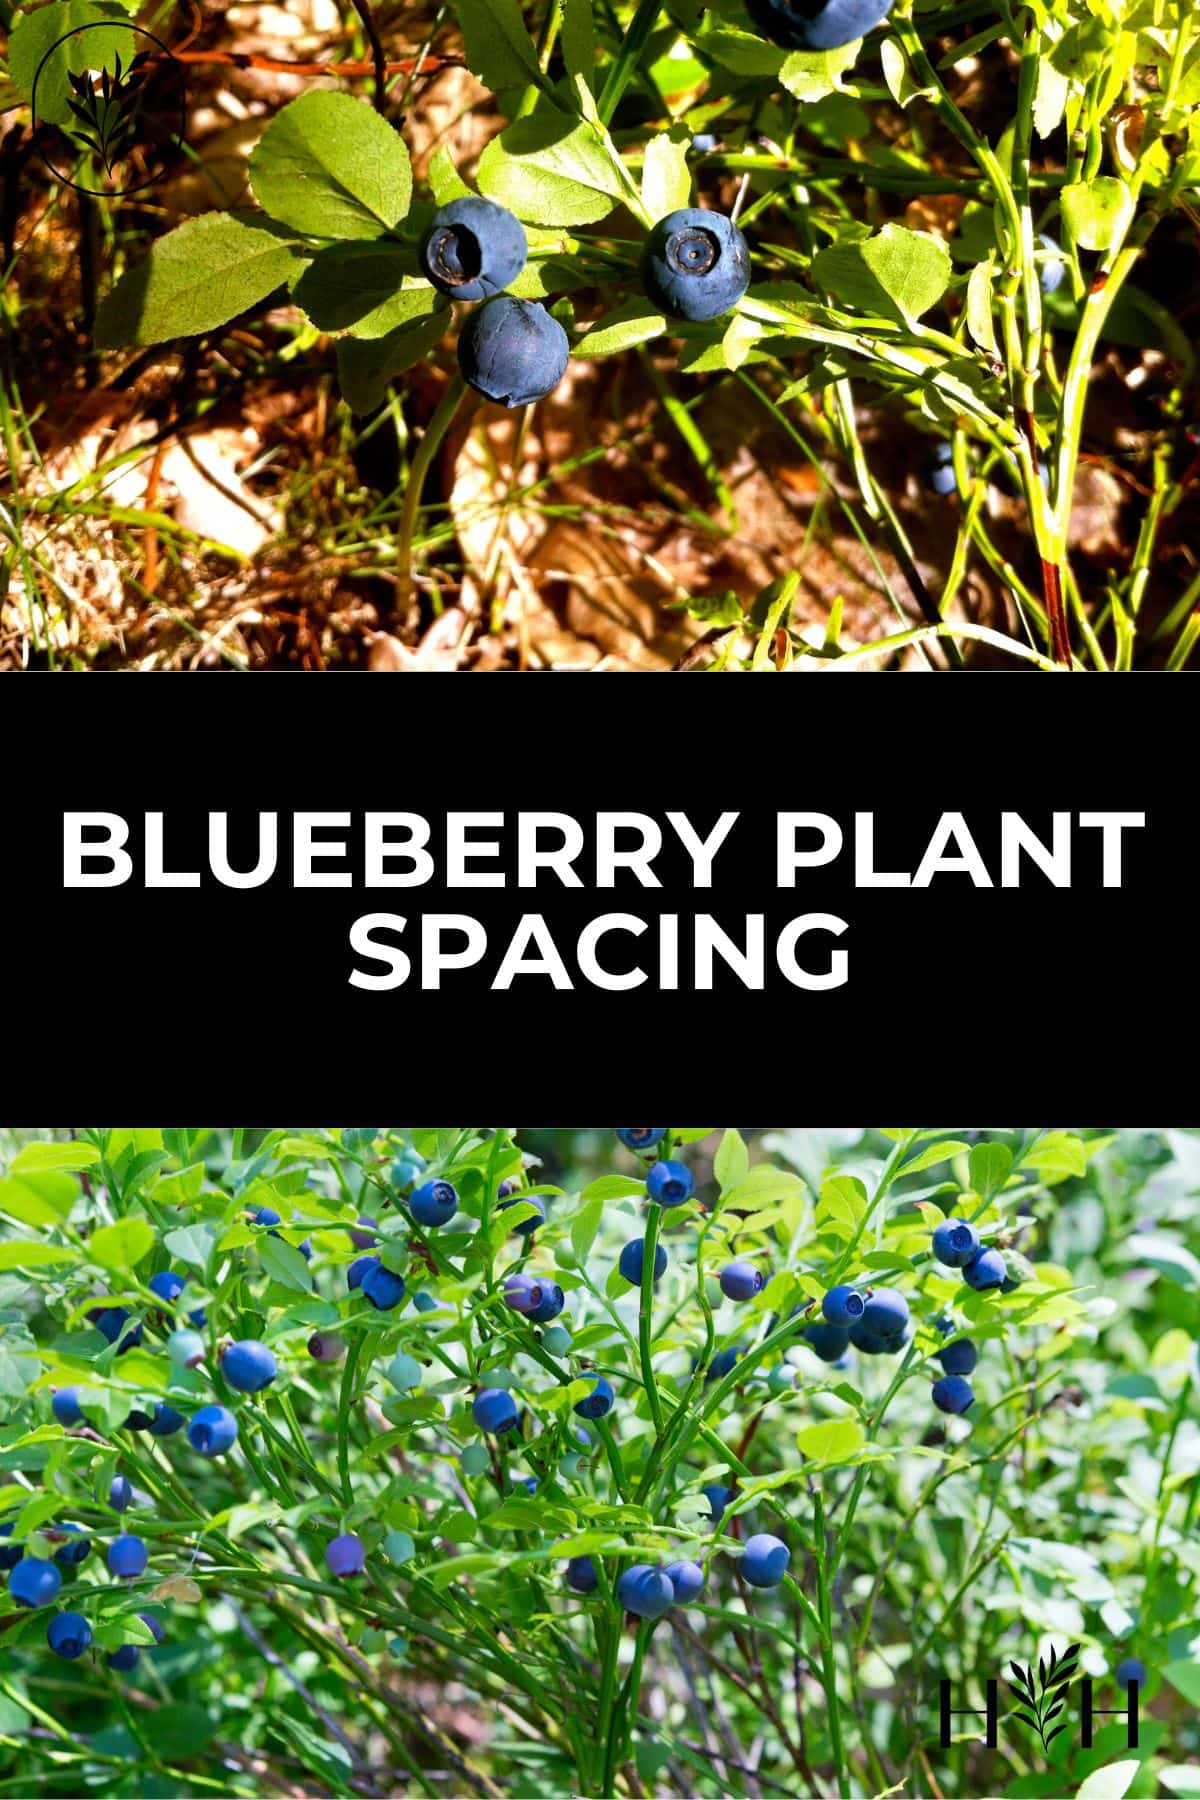 If you're planting a few blueberry bushes, its time to consider blueberry plant spacing. Whether you're planting a whole field or just a few shrubs along a pathway, its worth figuring out how far apart to plant them before you get out the shovel. Via @home4theharvest